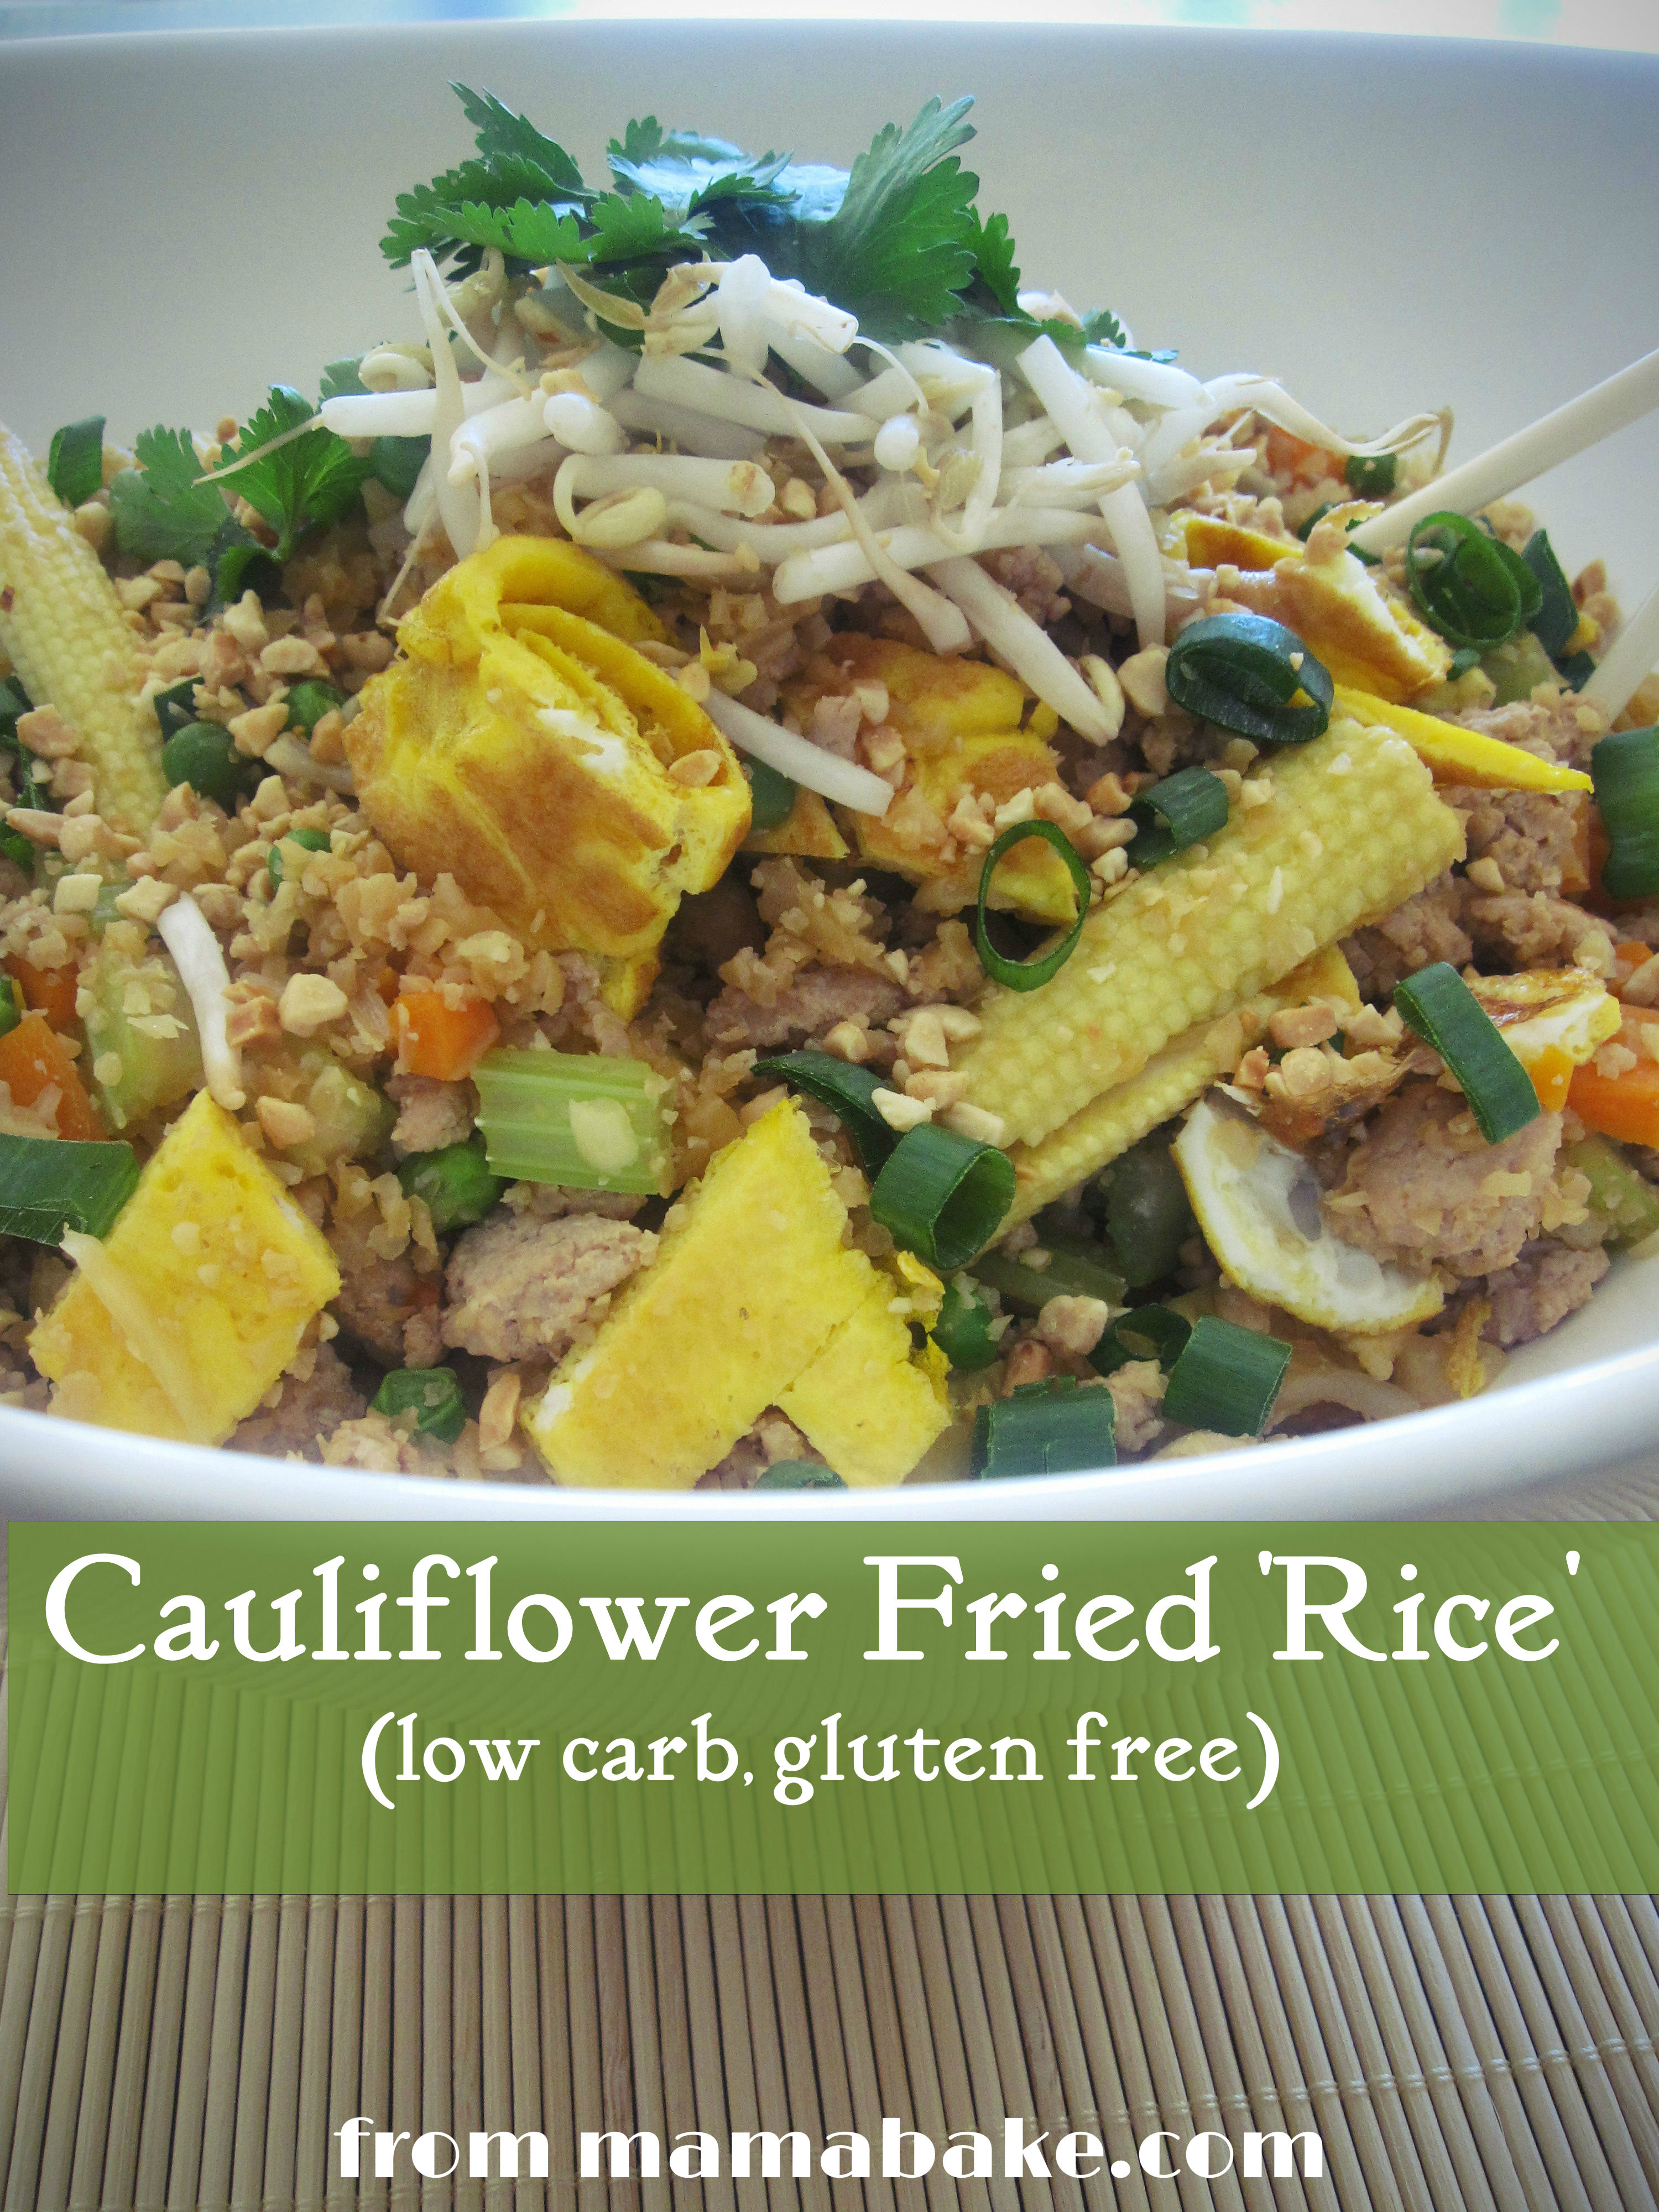 Is Cauliflower Low Carb Cauliflower Fried Rice Low Carb Gluten Free MamaBake